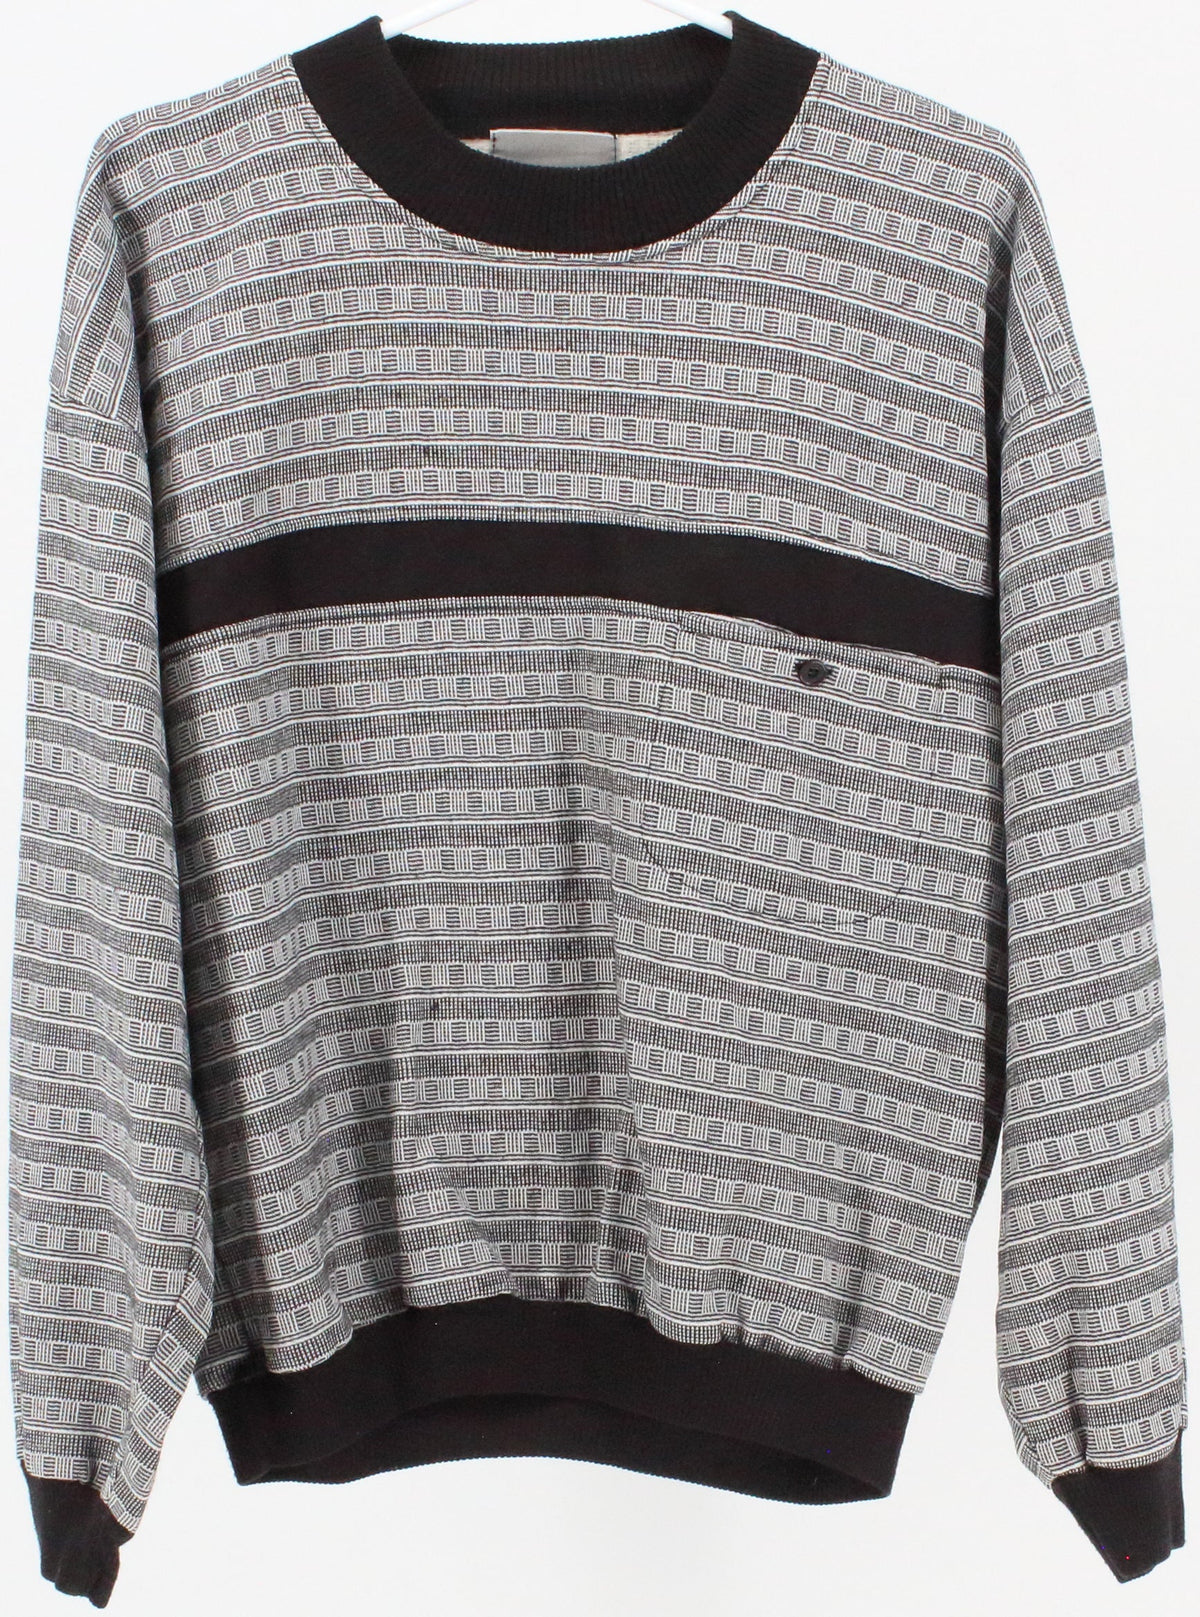 Xceptions by DSI Black and White Pattern Sweater